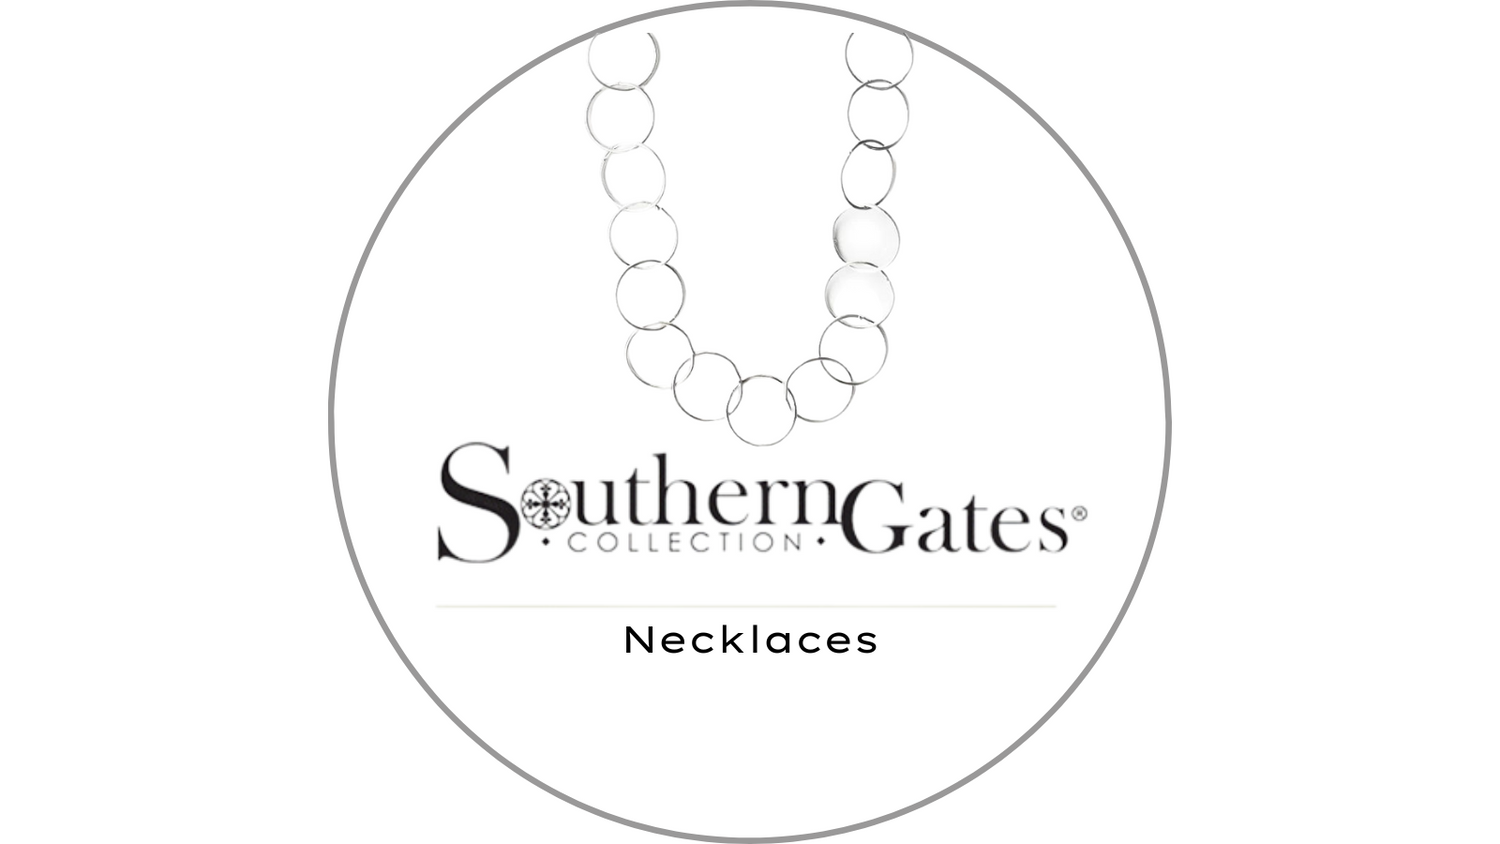 Southern Gates Necklaces